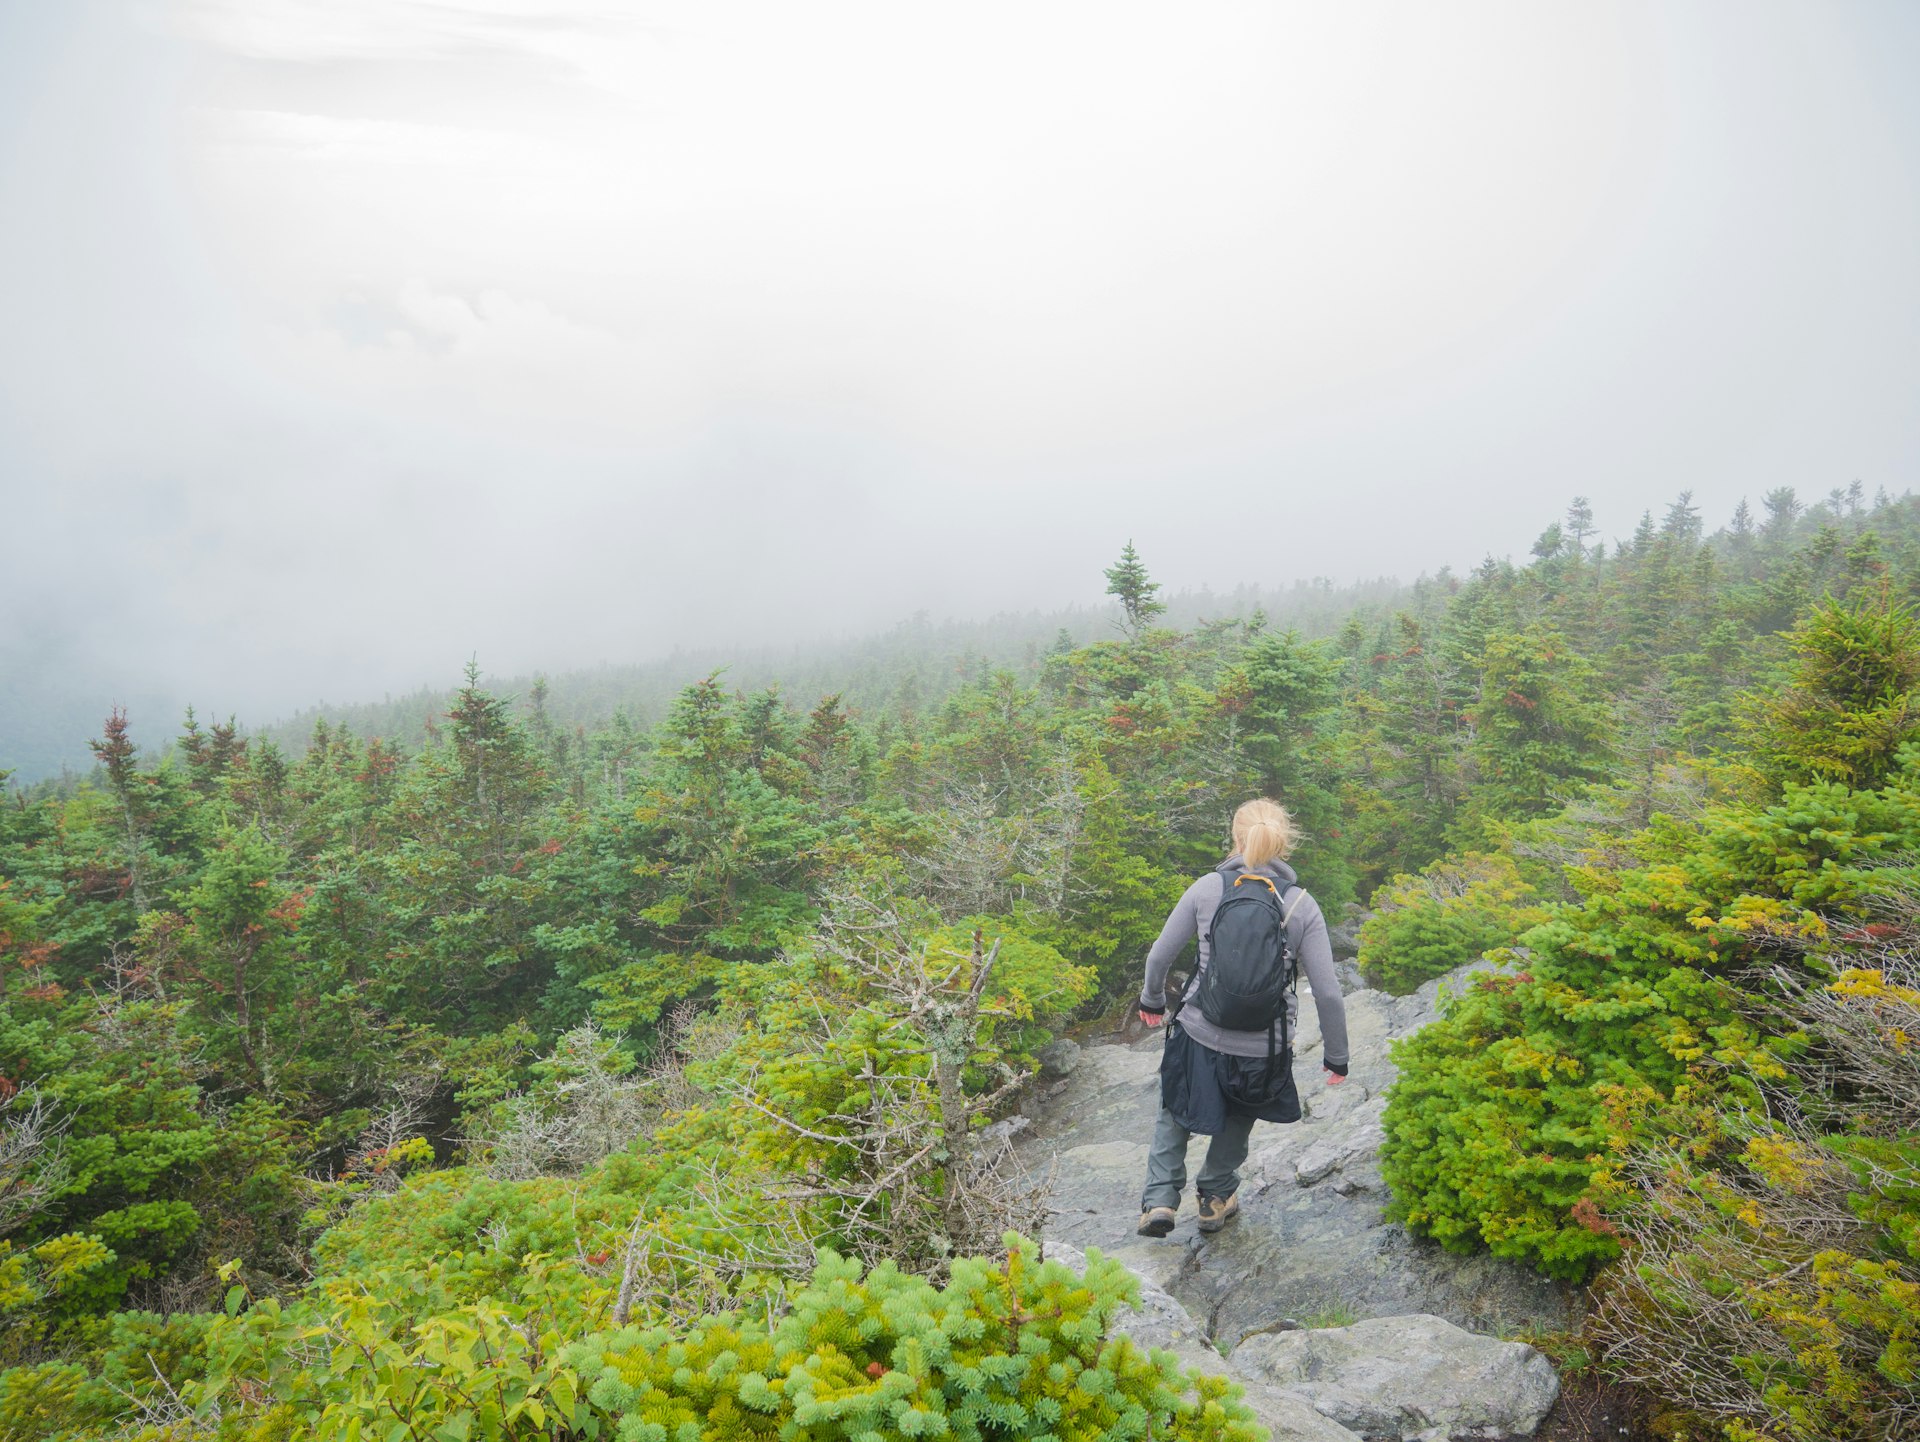 A woman hiker with blonde hair in grey and black outdoor clothing descends a stone path edged by low green shrubs surrounded by fog on the Long Trail in Vermont